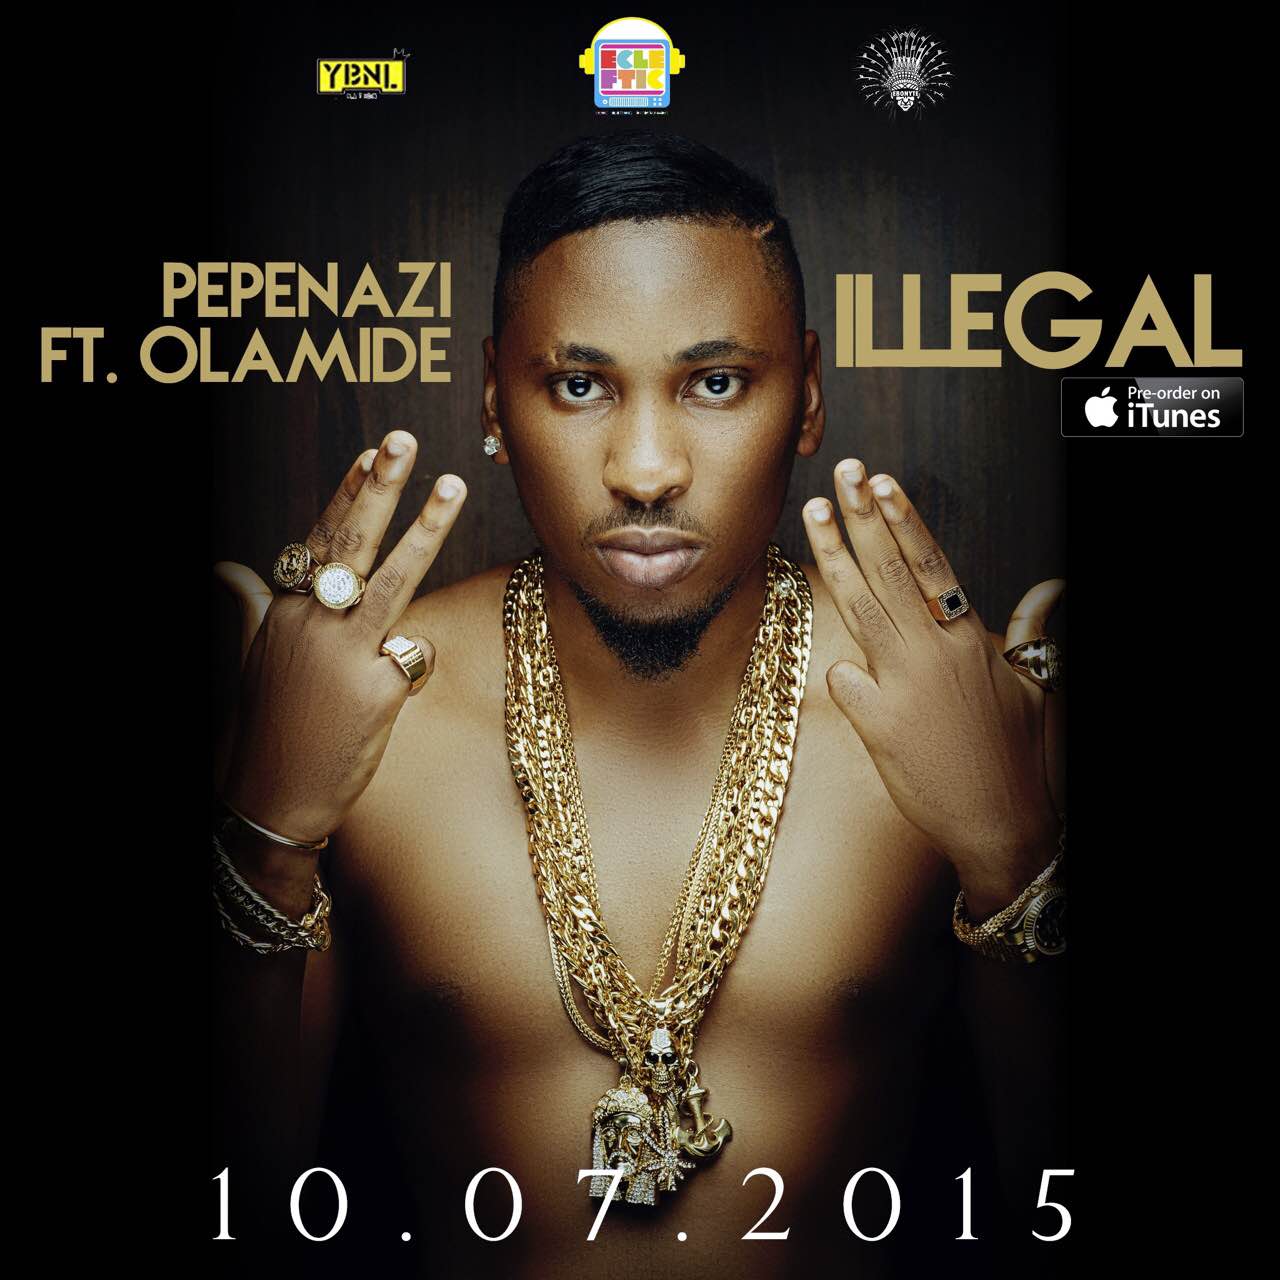 Illegal by Pepenazi ft. Olamide